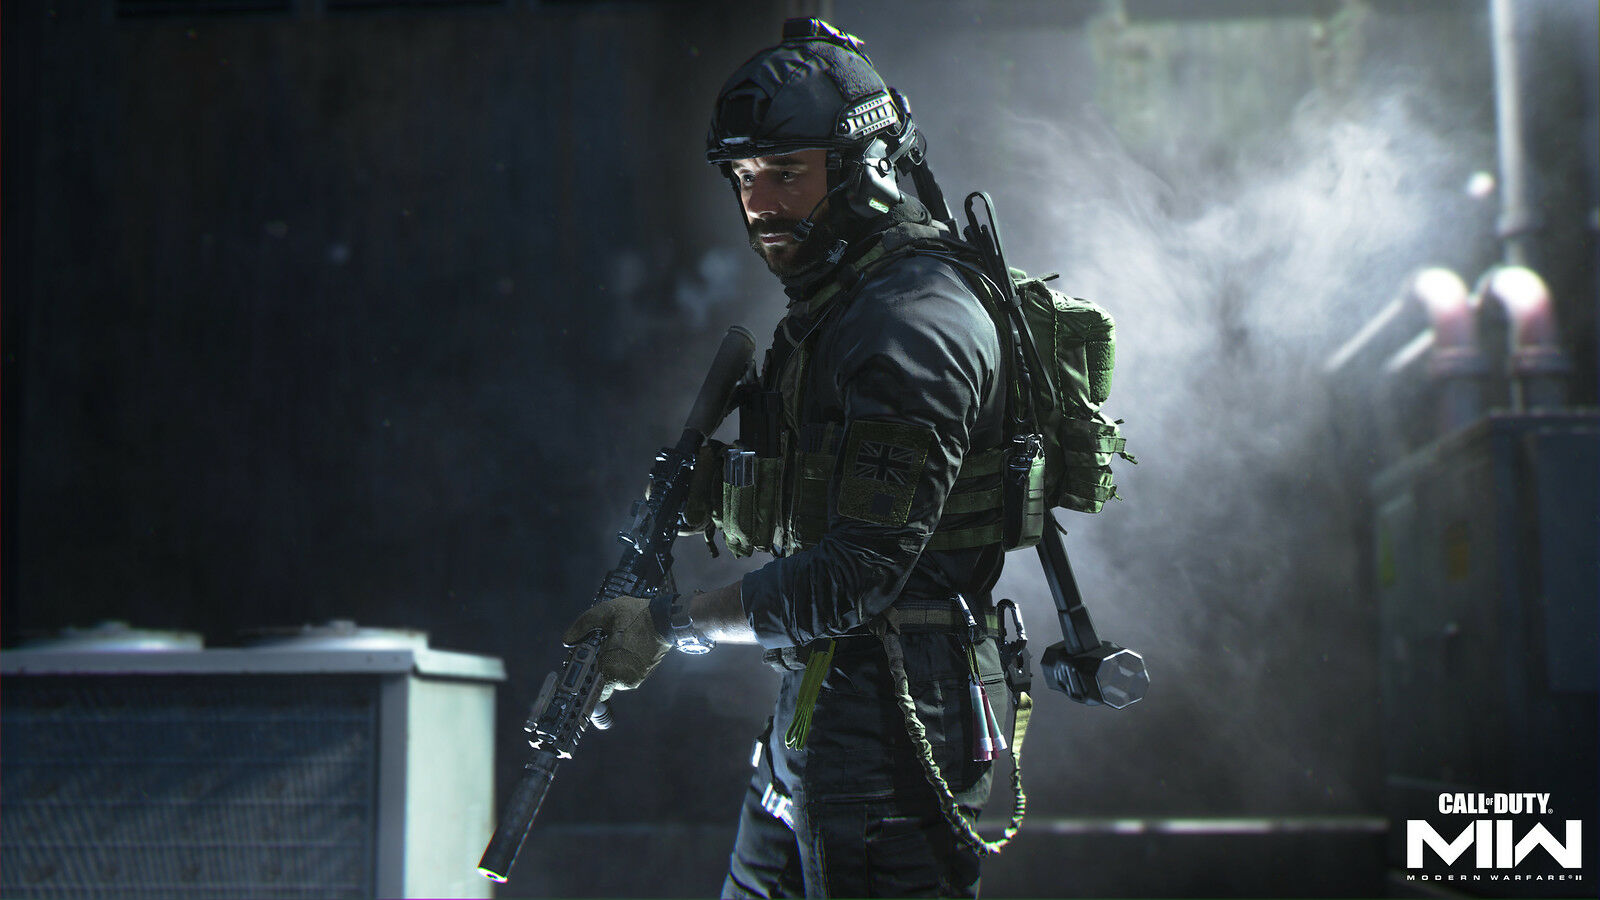 PlayStation CEO: Xbox's Call of Duty Offer is "Inadequate"